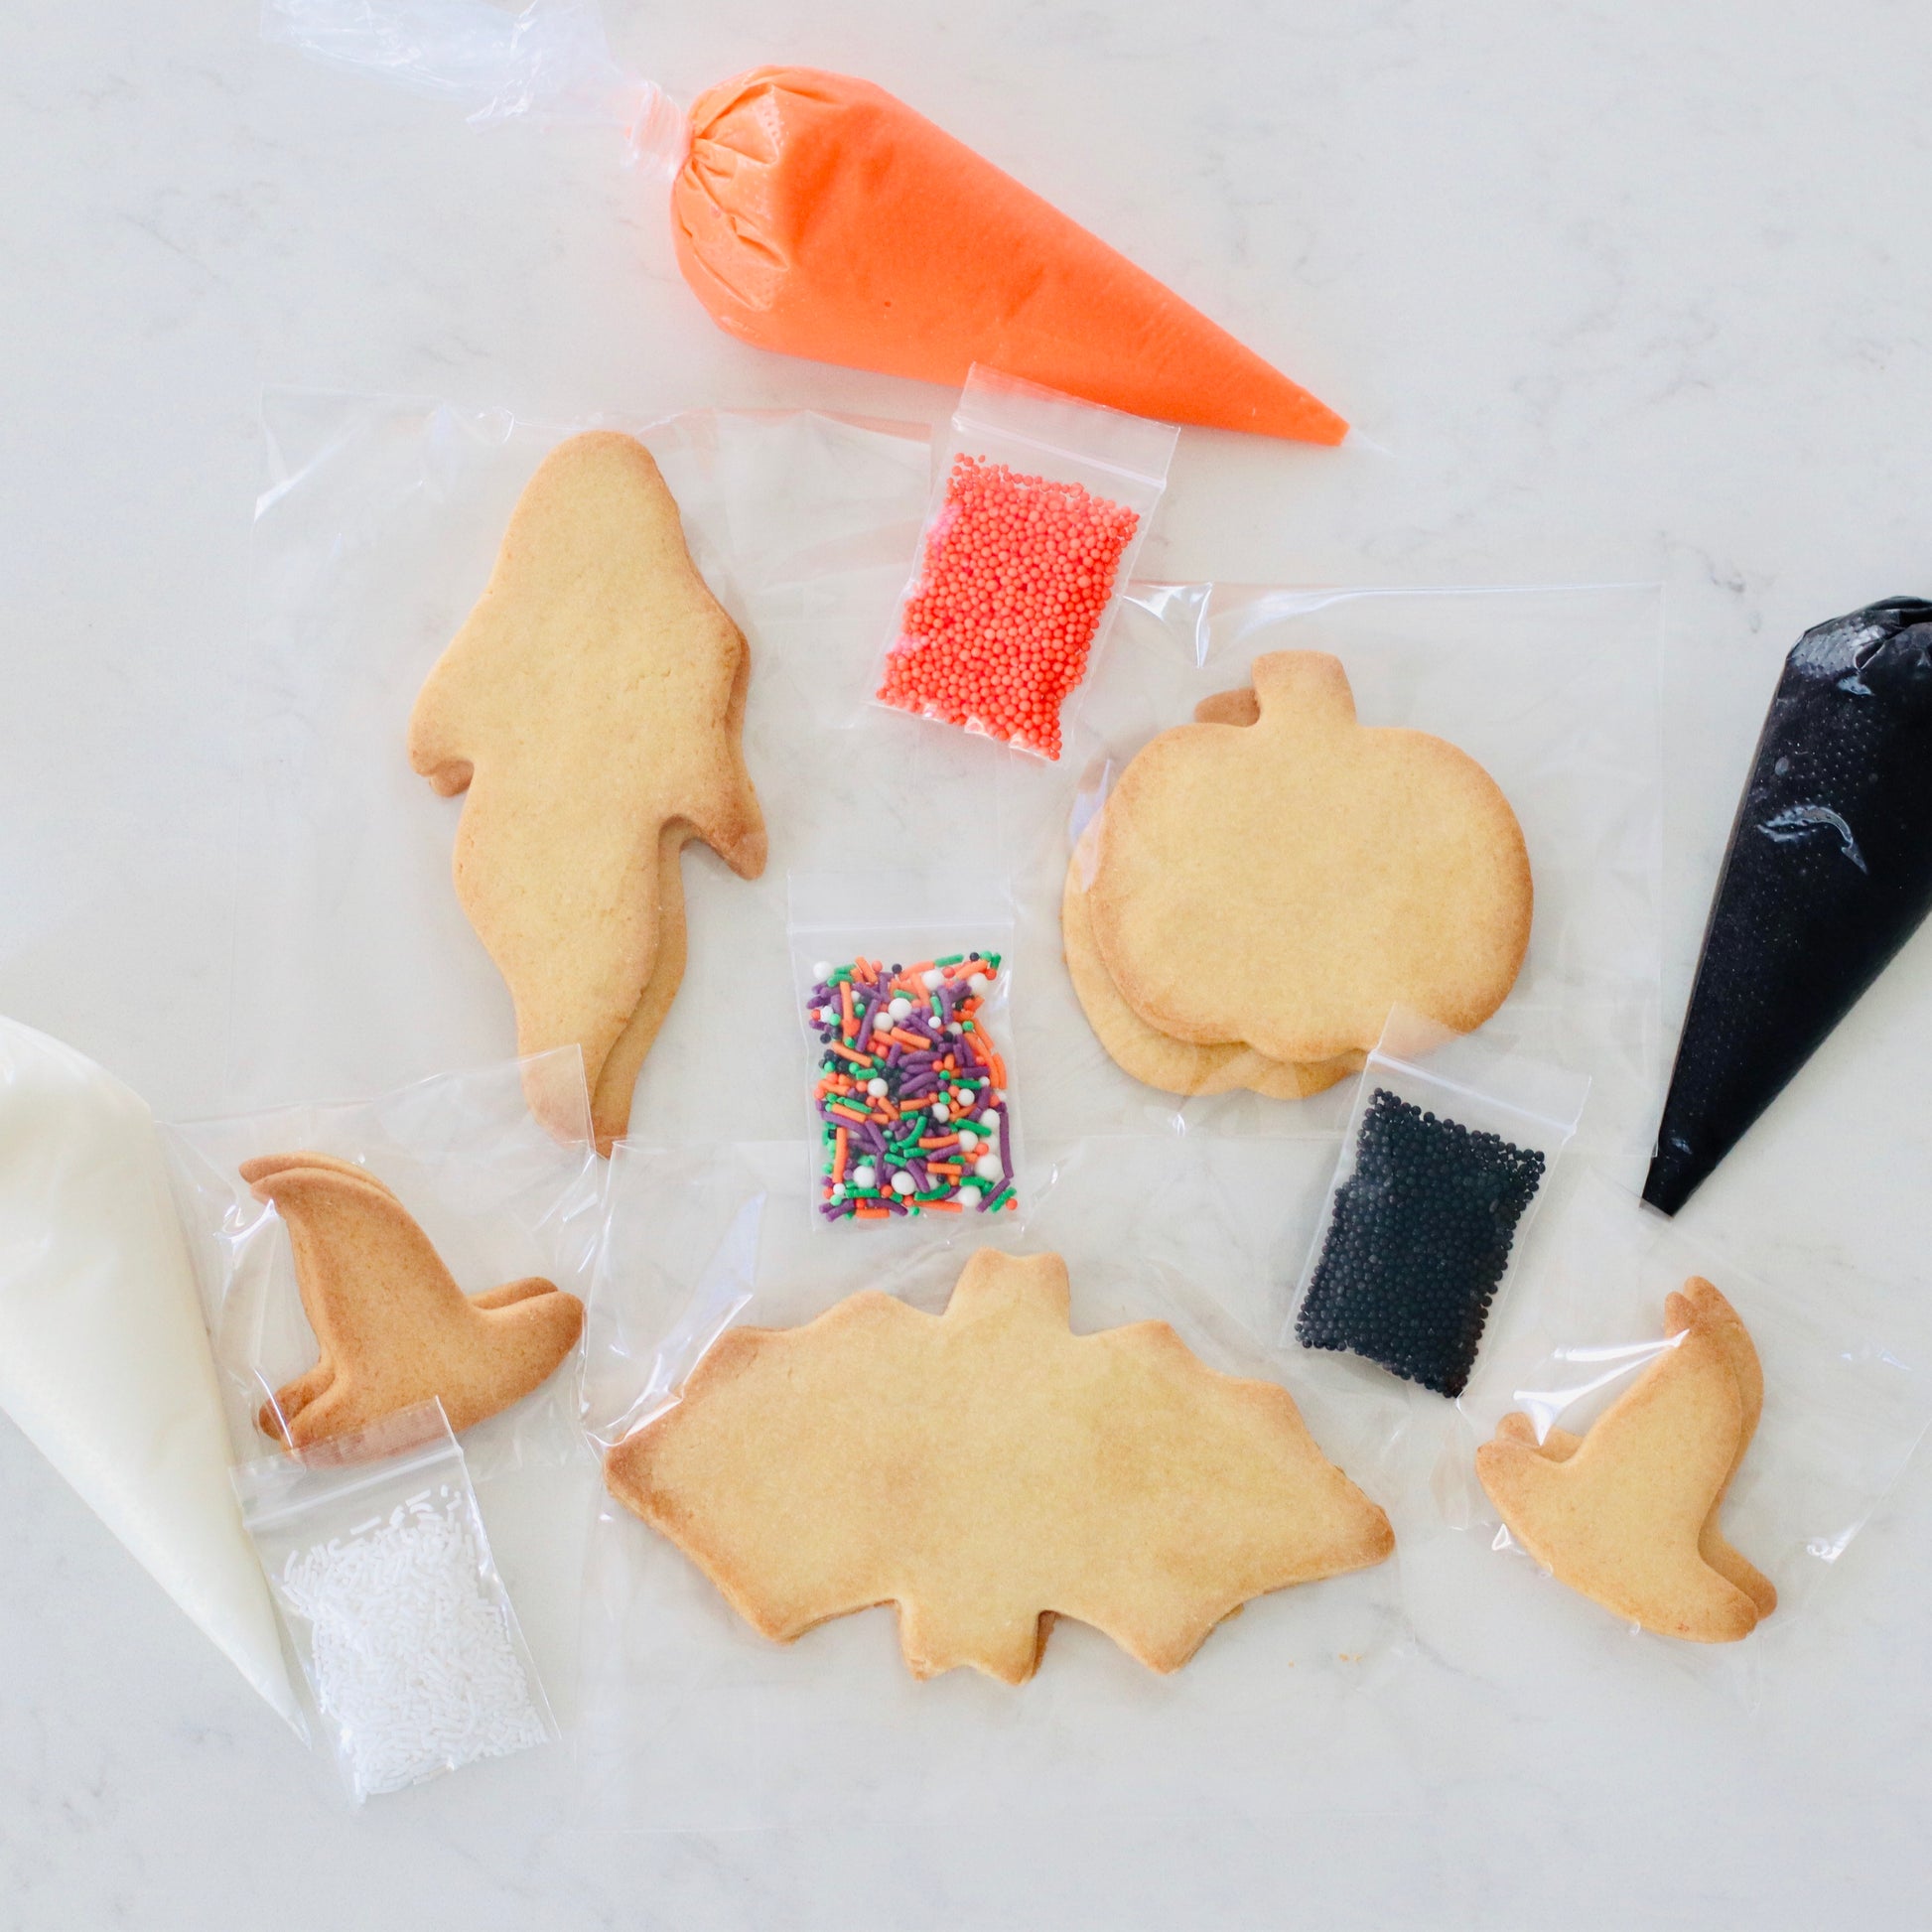 DIY cookie kit, includes everything you need to make your own gorgeous Halloween cookies.